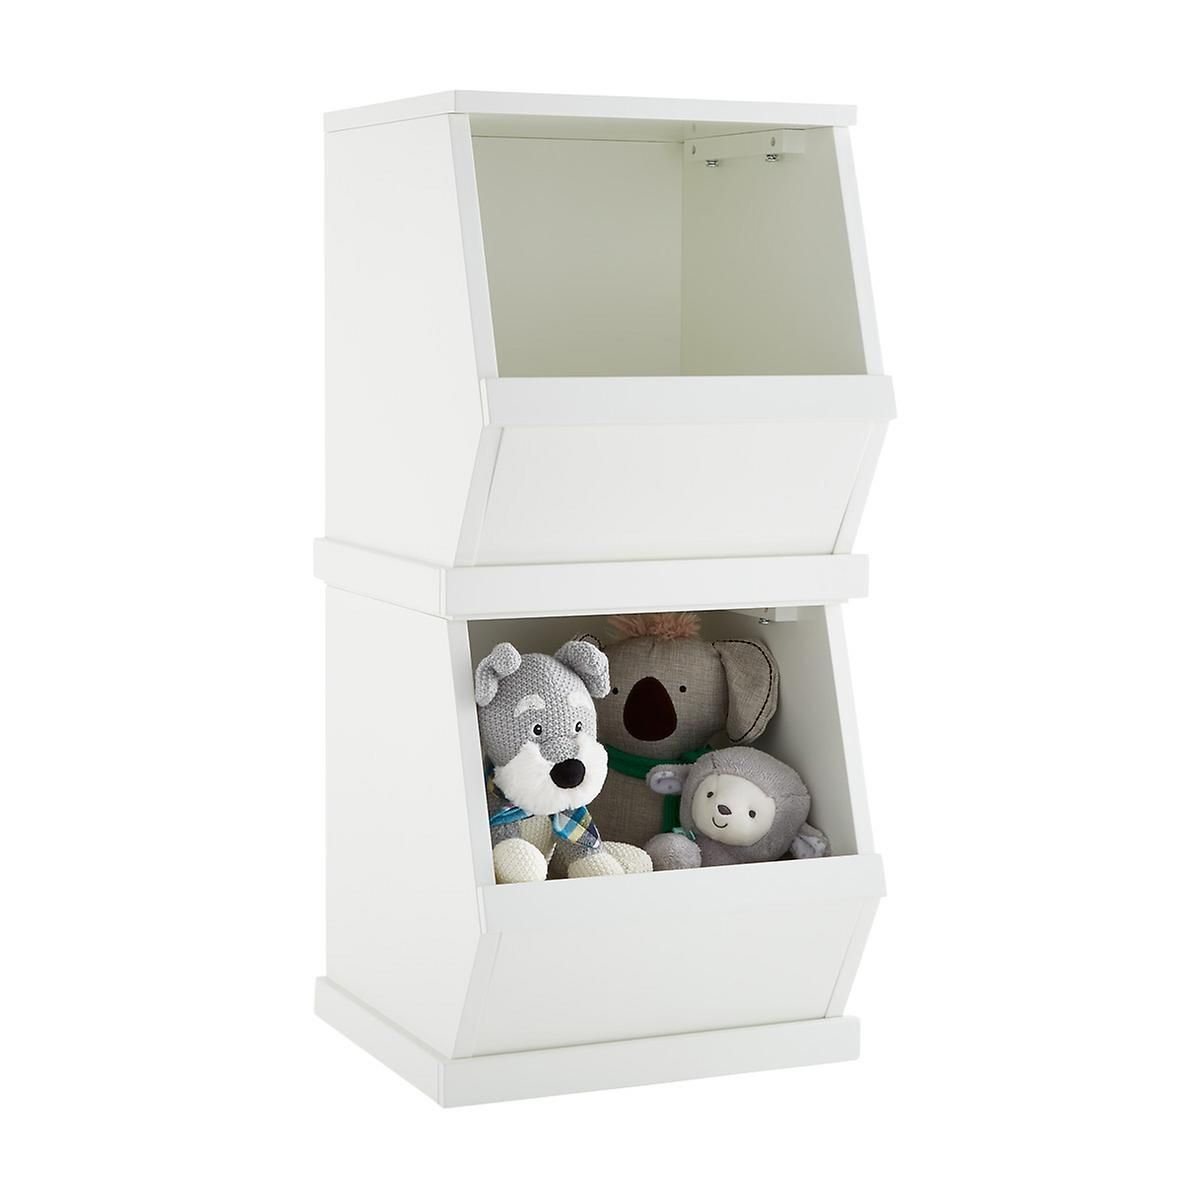 White Nantucket Single Stackable Storage Bin Organize My Life within dimensions 1200 X 1200